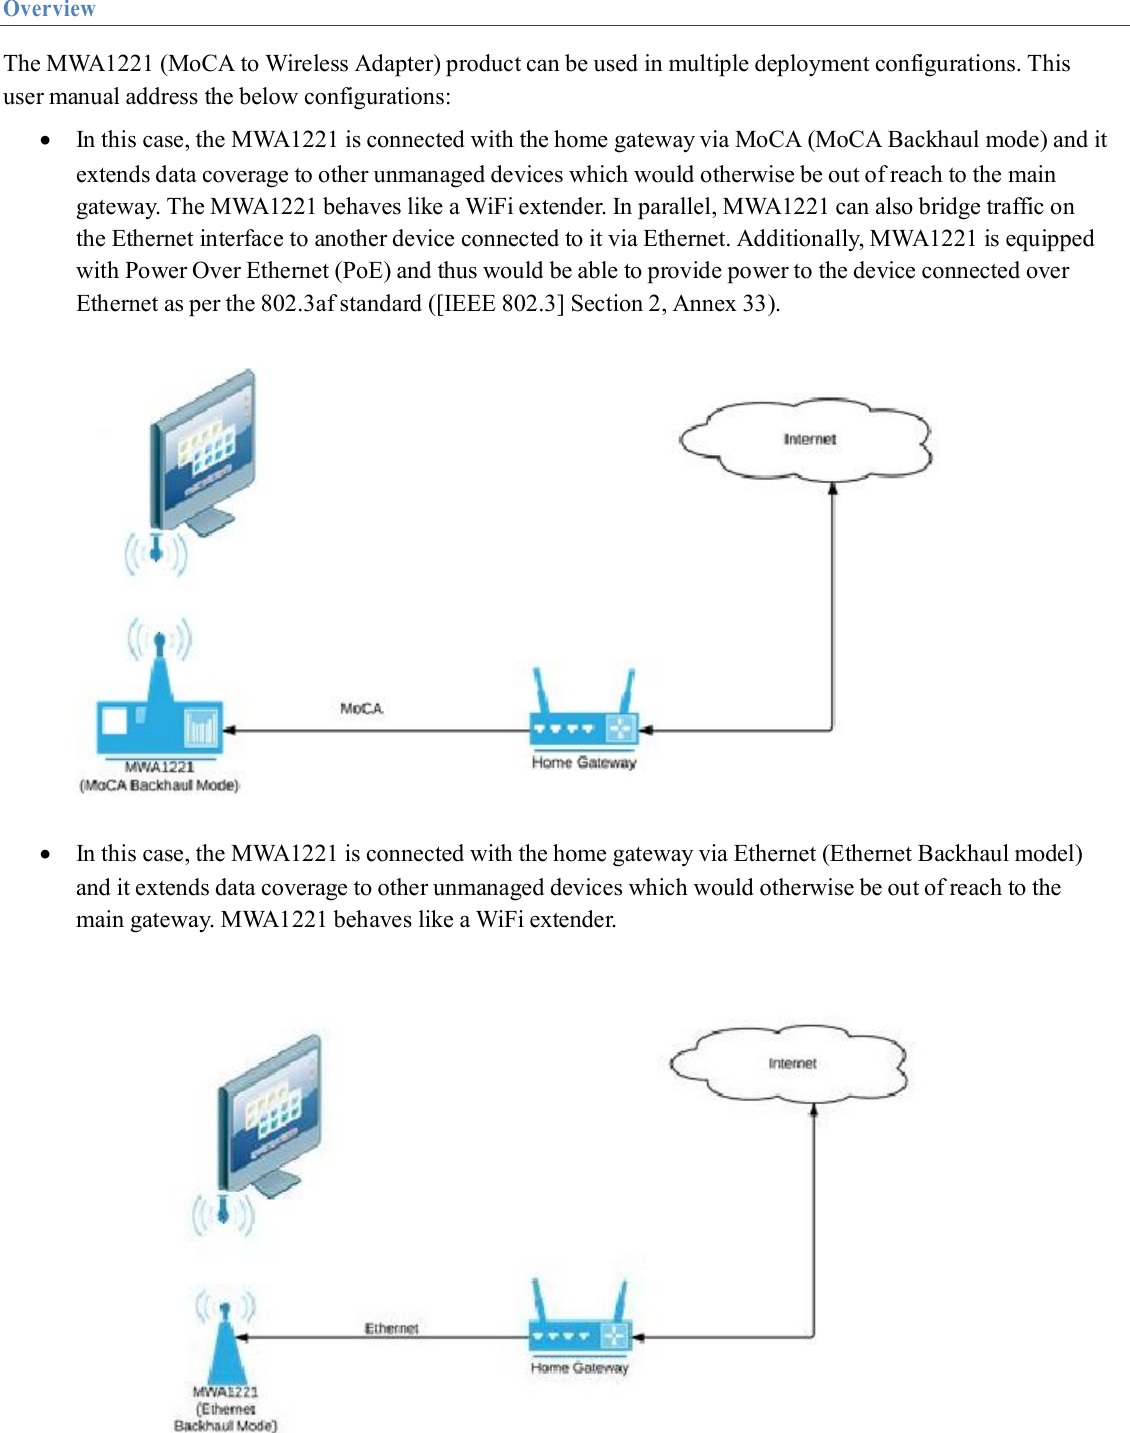    Overview  The MWA1221 (MoCA to Wireless Adapter) product can be used in multiple deployment configurations. This user manual address the below configurations:  In this case, the MWA1221 is connected with the home gateway via MoCA (MoCA Backhaul mode) and it extends data coverage to other unmanaged devices which would otherwise be out of reach to the main gateway. The MWA1221 behaves like a WiFi extender. In parallel, MWA1221 can also bridge traffic on the Ethernet interface to another device connected to it via Ethernet. Additionally, MWA1221 is equipped with Power Over Ethernet (PoE) and thus would be able to provide power to the device connected over Ethernet as per the 802.3af standard ([IEEE 802.3] Section 2, Annex 33).                       In this case, the MWA1221 is connected with the home gateway via Ethernet (Ethernet Backhaul model) and it extends data coverage to other unmanaged devices which would otherwise be out of reach to the main gateway. MWA1221 behaves like a WiFi extender.